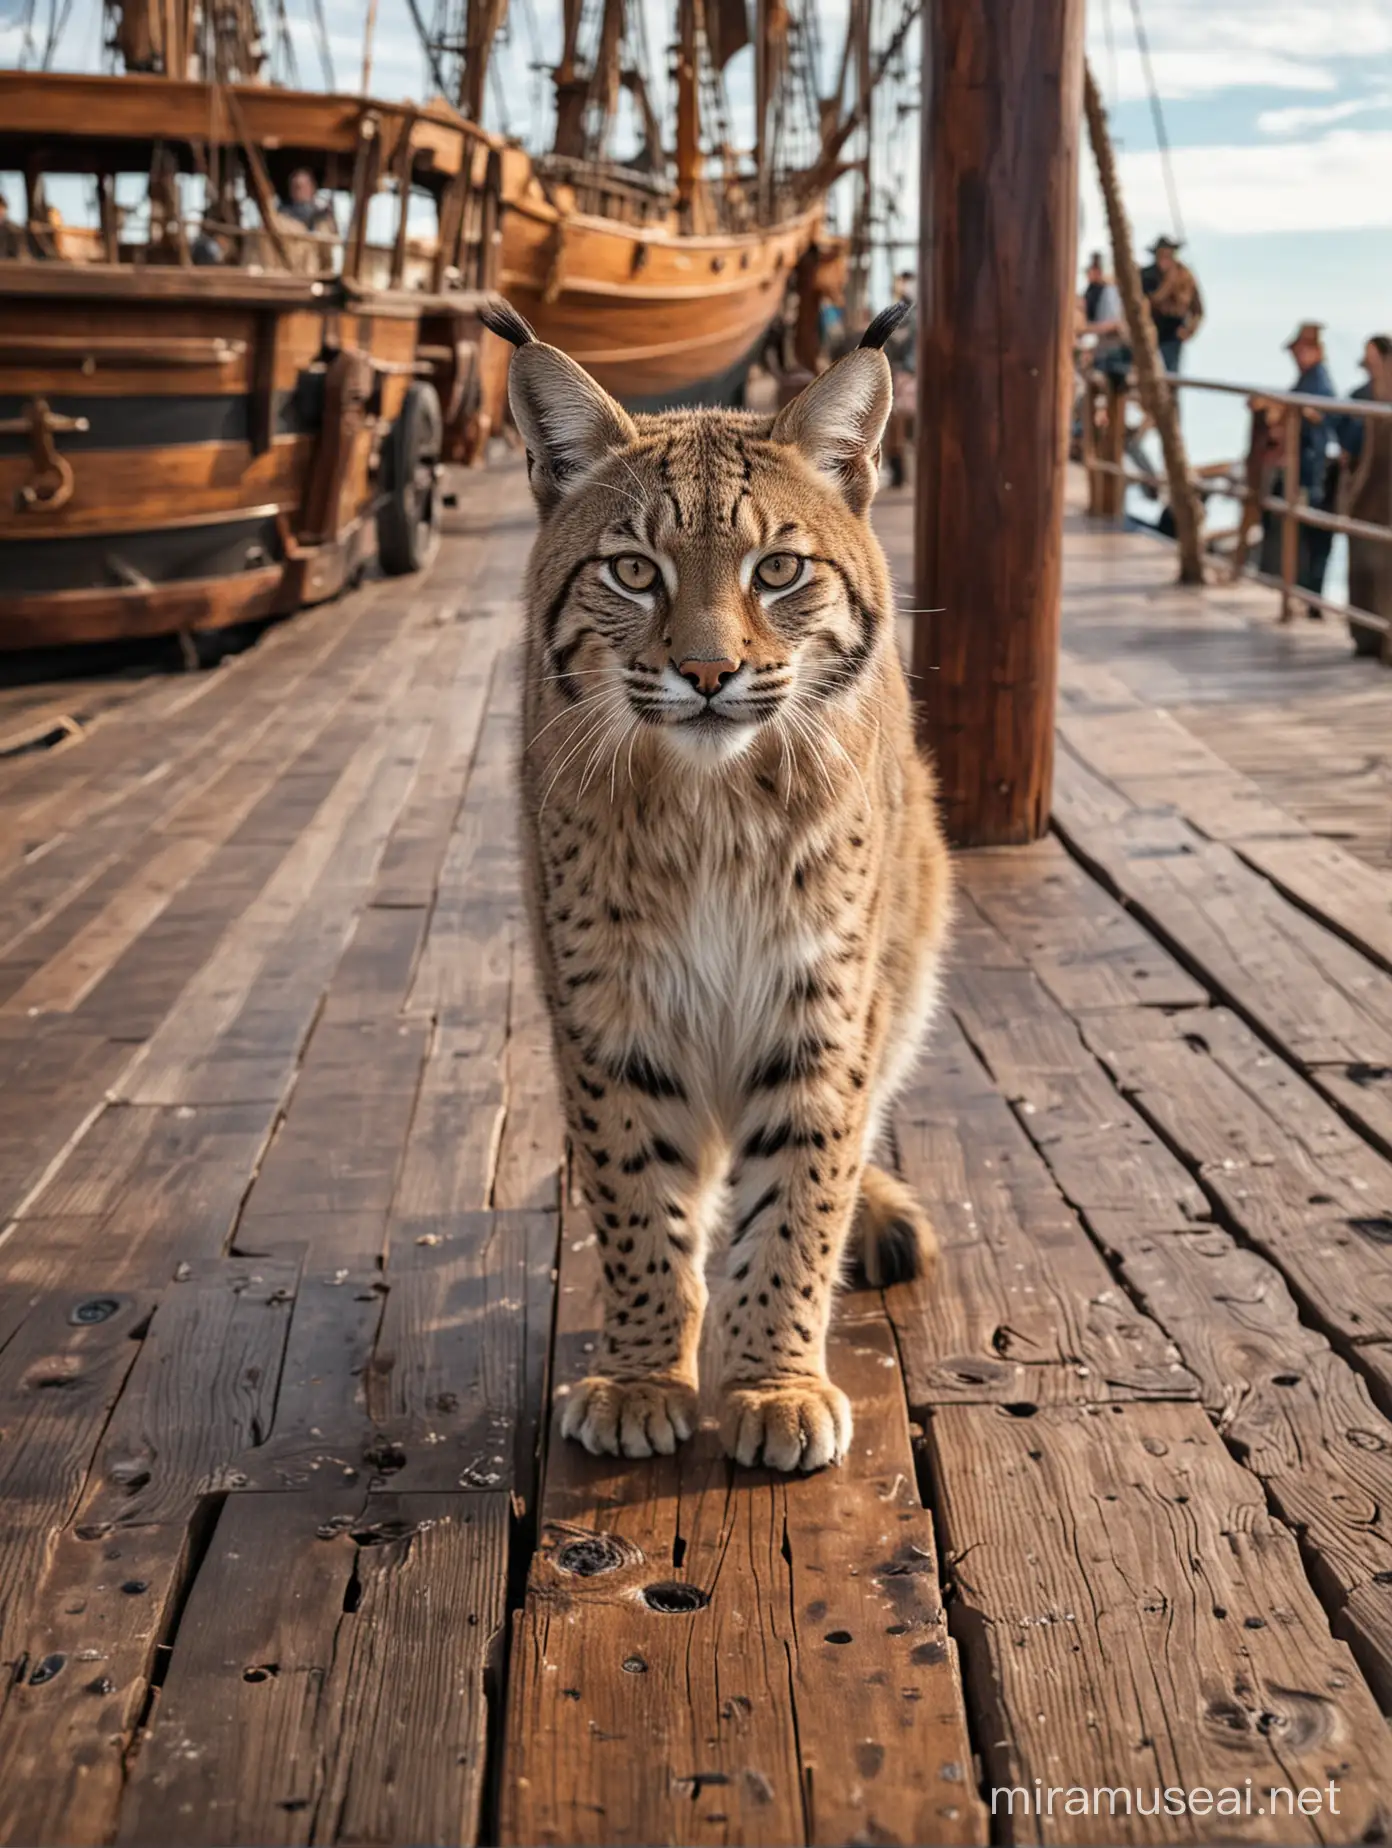 Bobcat, walking on the wooden floor, at the main deck of the pirate ship, sailing.